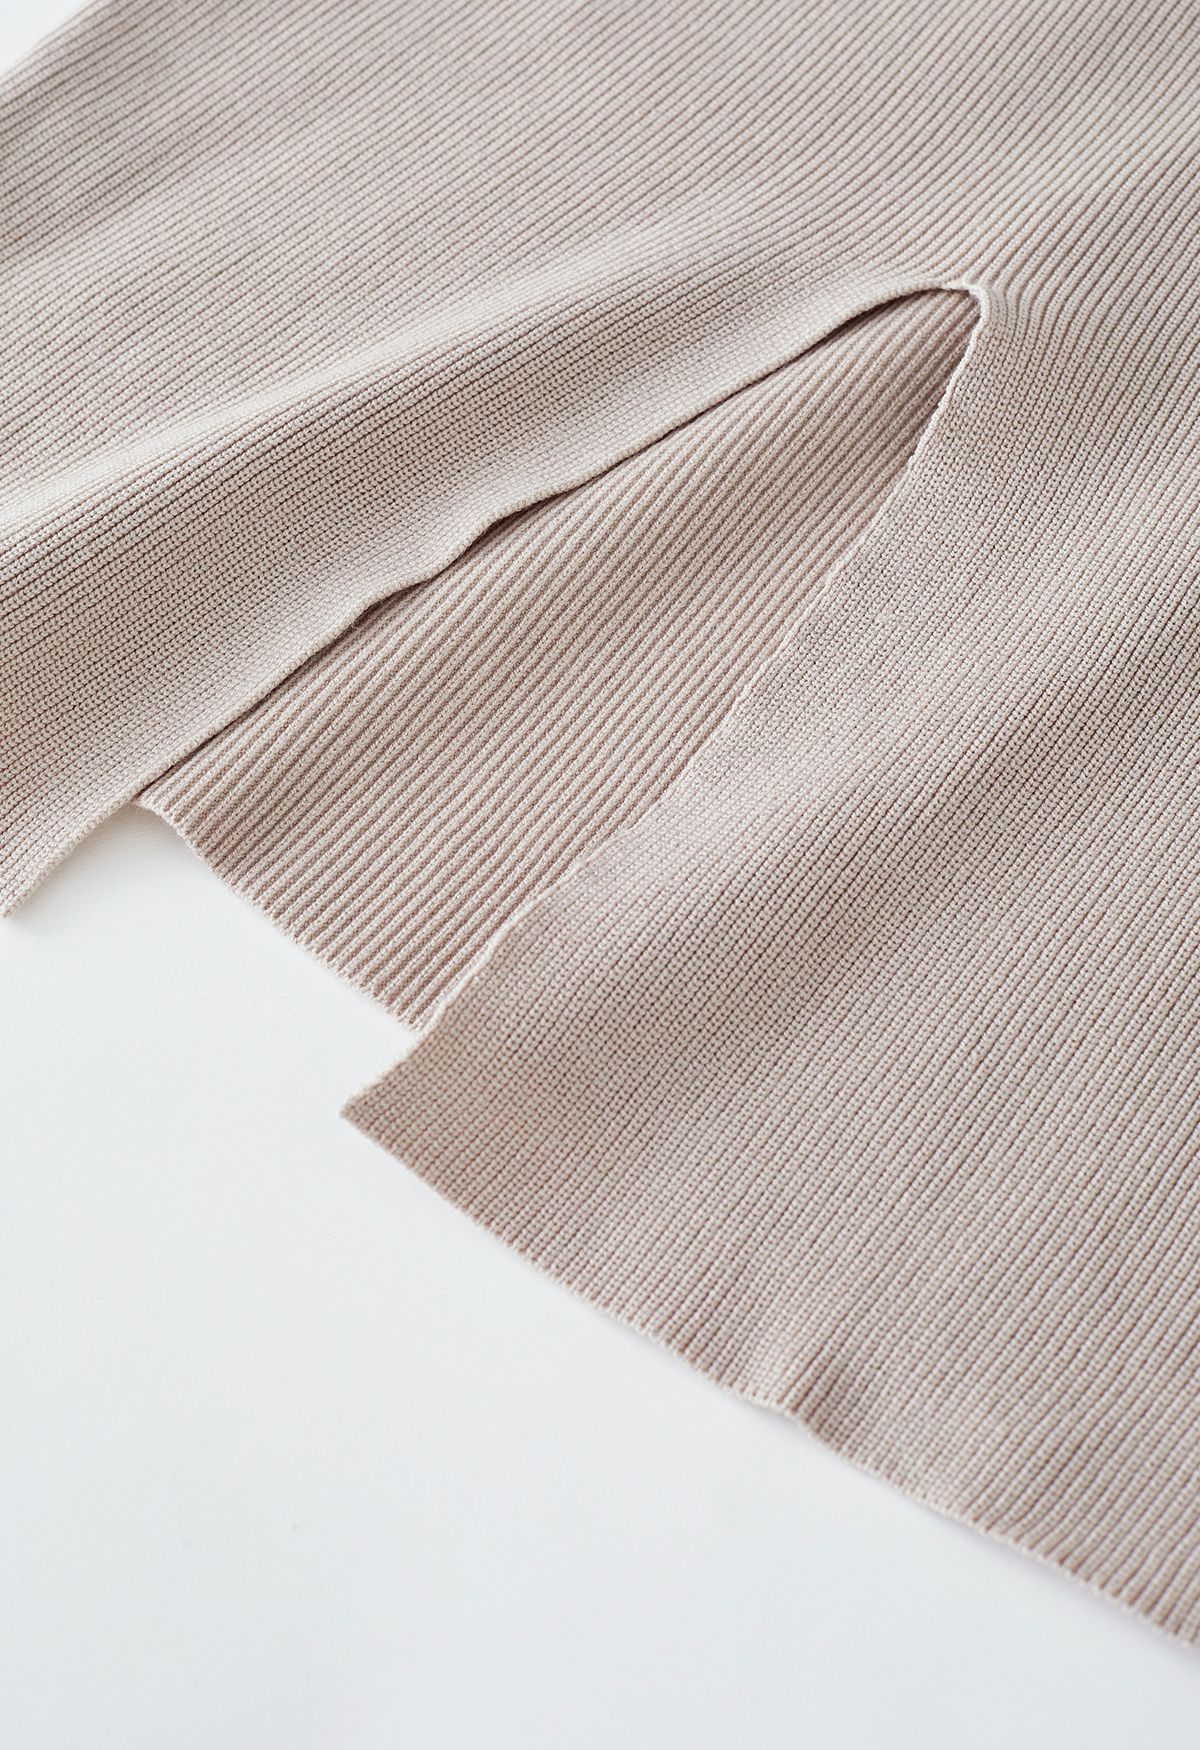 Comfy Ribbed Knit Top and Midi Skirt Set in Linen - Retro, Indie and ...